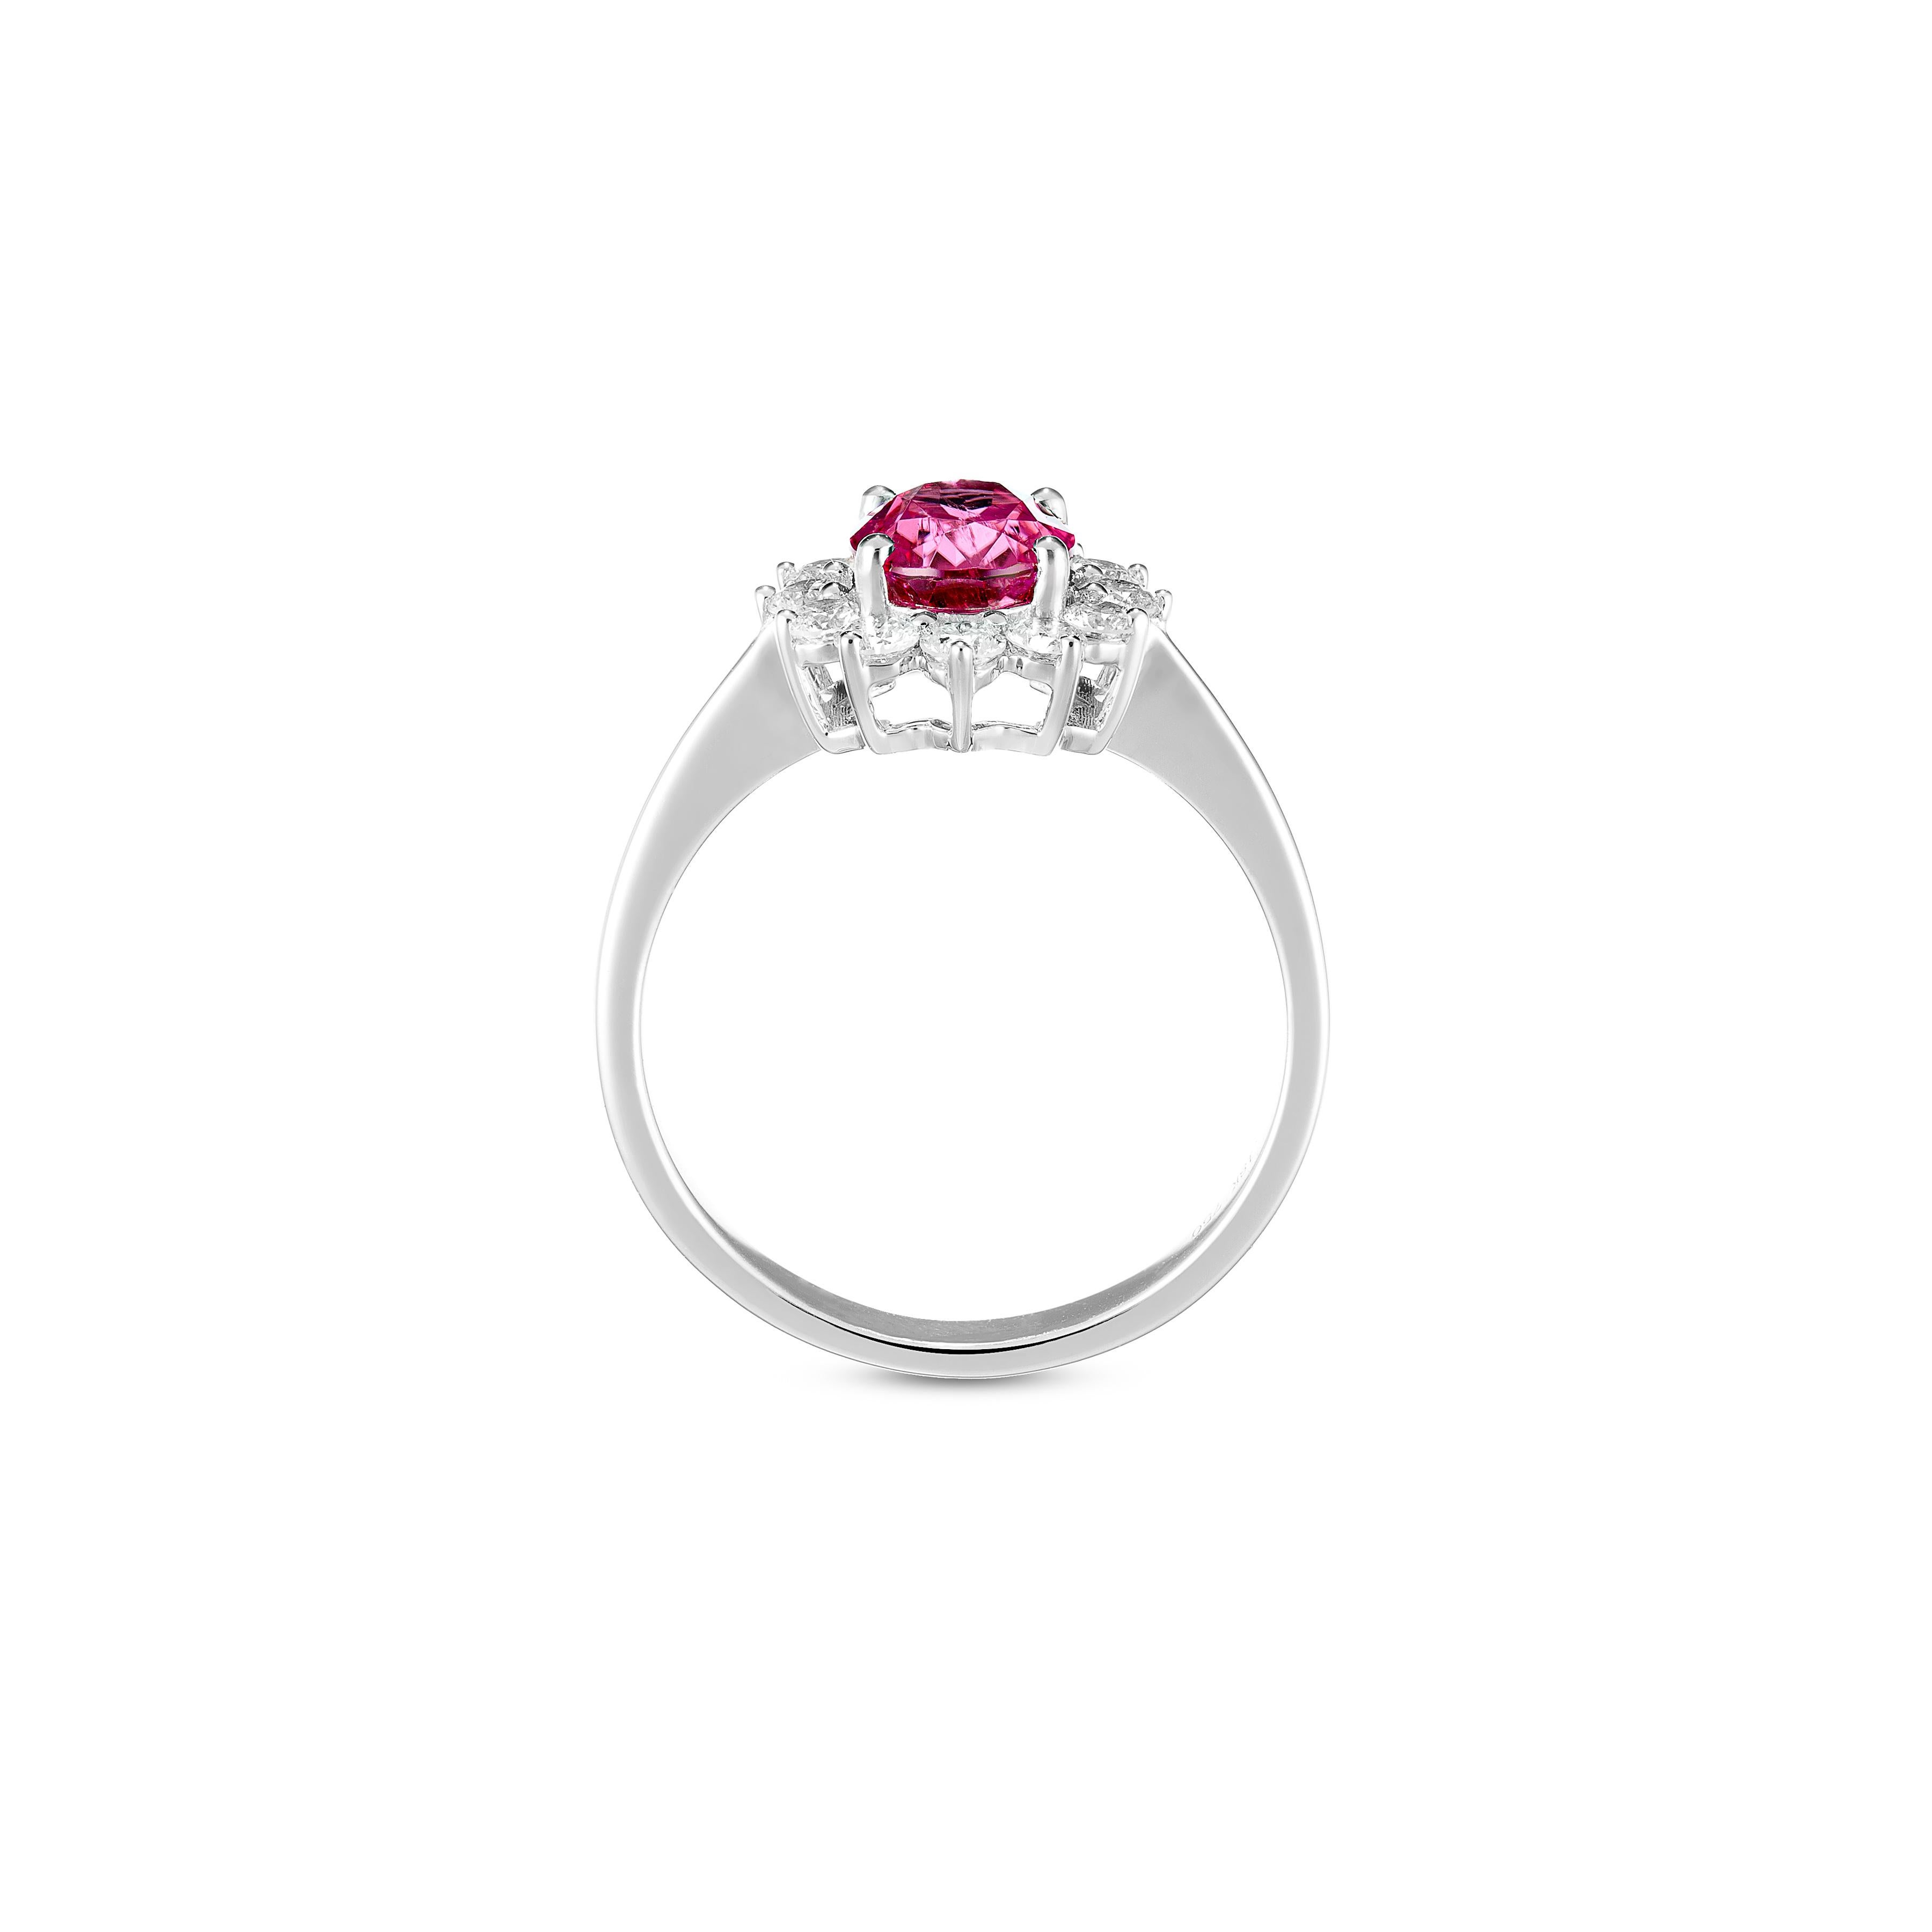 Rare natural African Tourmaline ring handcrafted in 18ct white gold .
Rubellite is the red or pink variety of Tourmaline and is a member of elbaite. Rubellite is also the rarest gem in its gem family. It is occasionally mistaken for ruby.
 It is